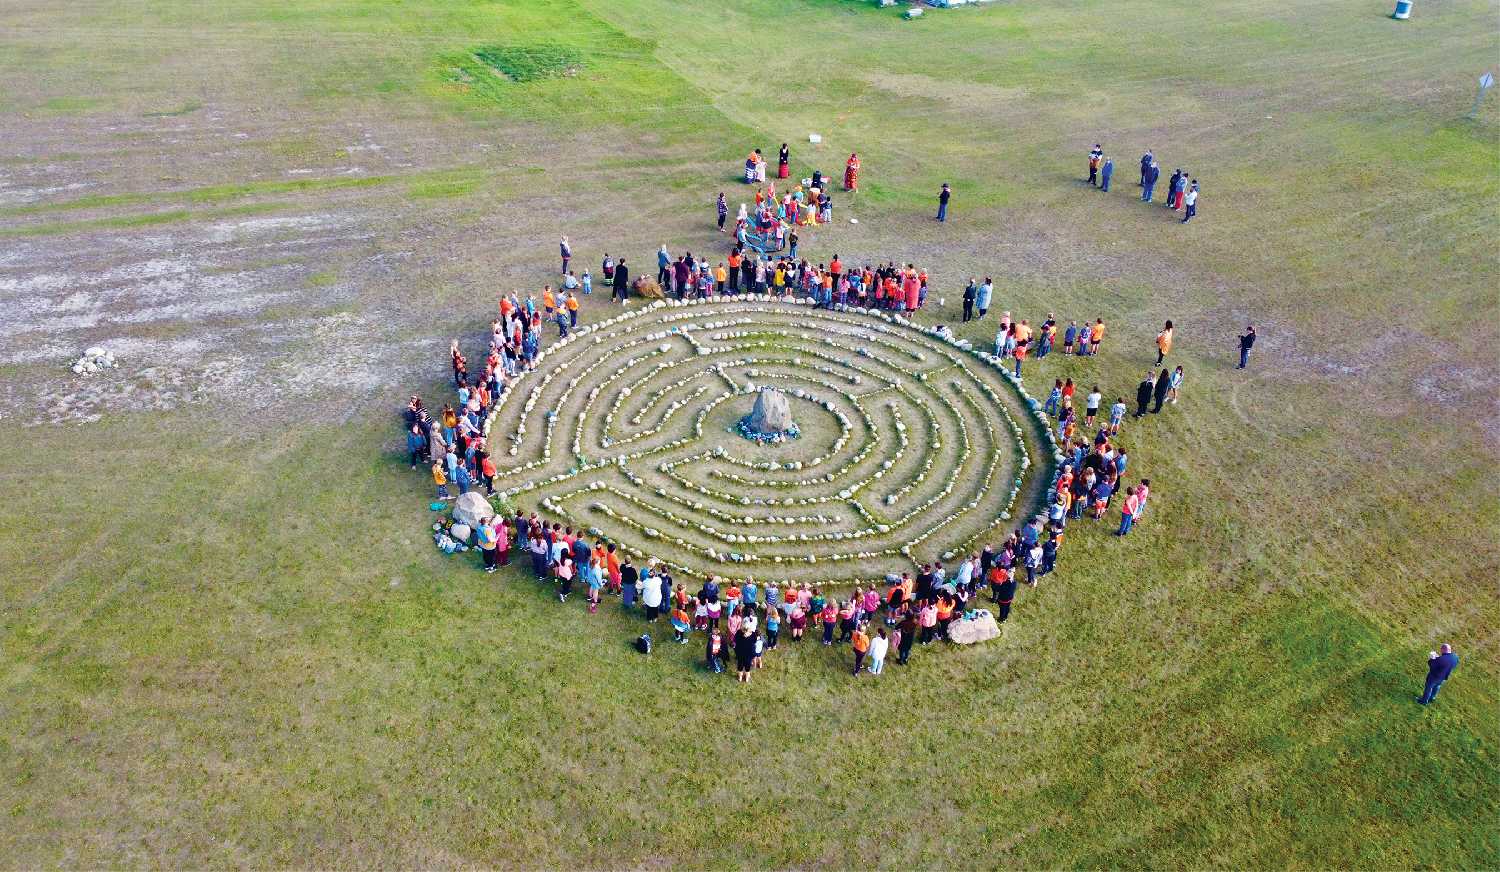 The students surrounding the labyrinth at the start of the ceremony